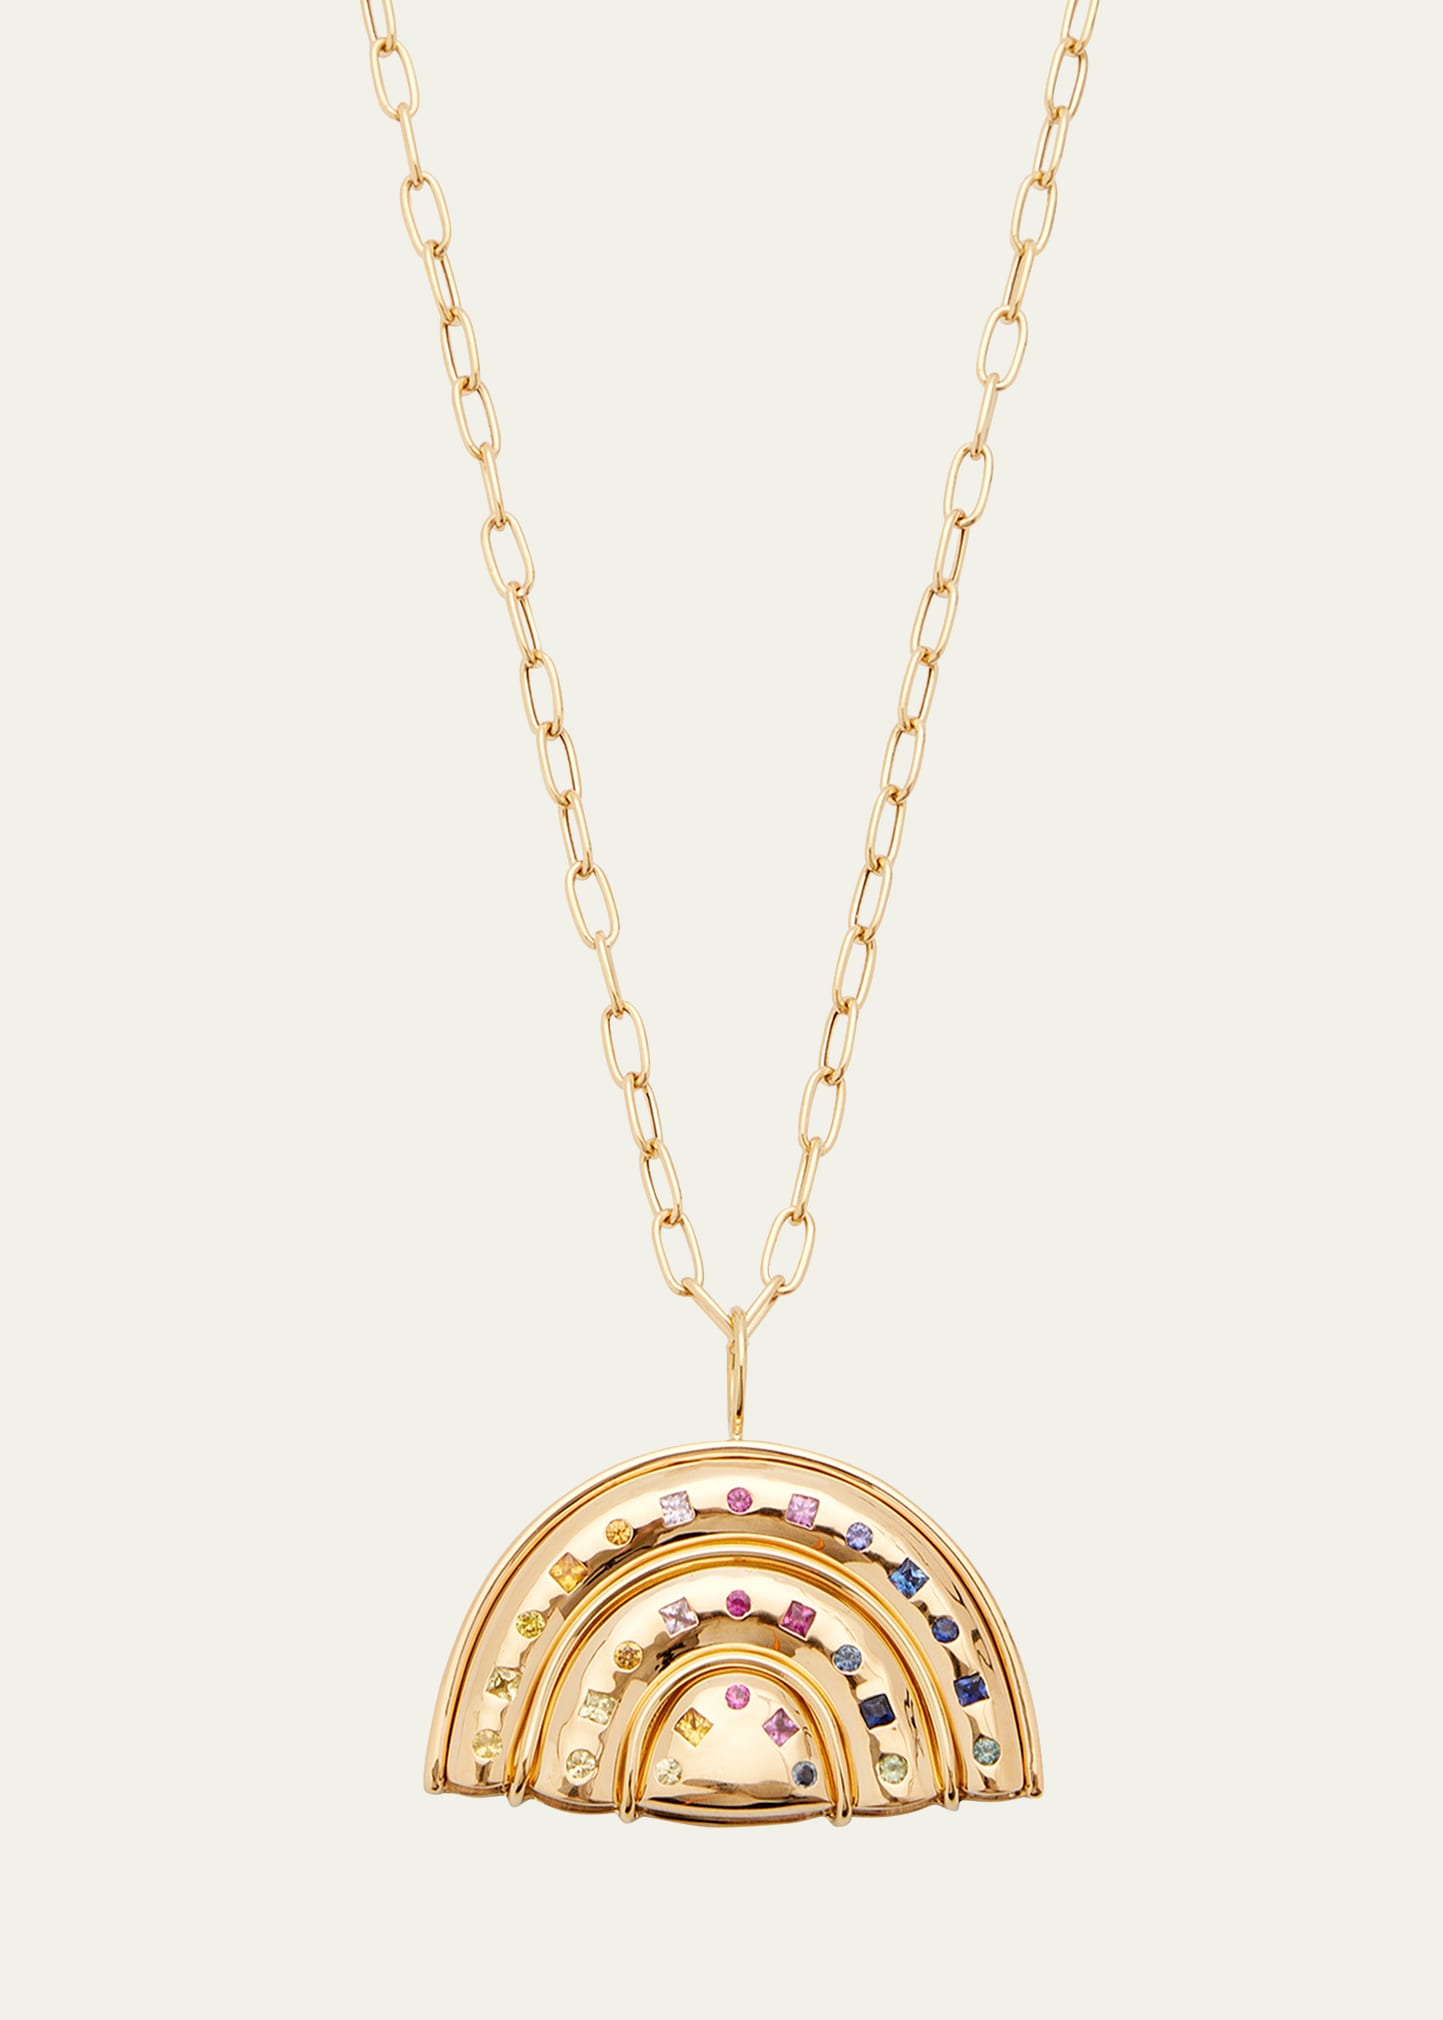 Medium Gold Marianne Pendant Necklace with Rainbow Sapphires